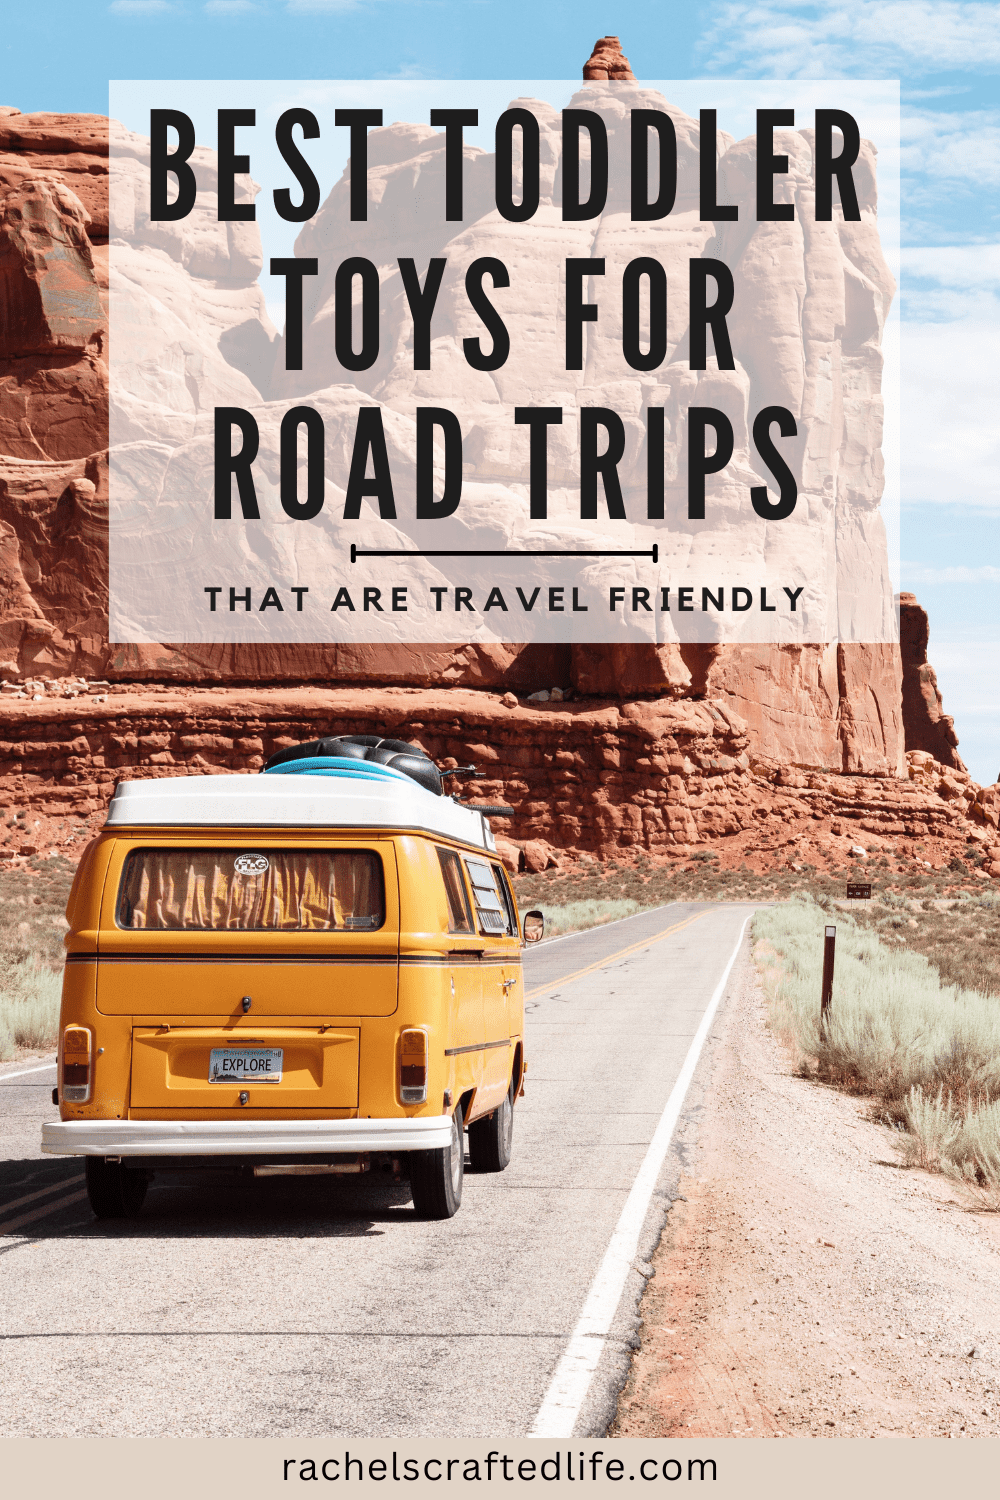 You are currently viewing Best Toddler Toys for Road Trips that are Travel Friendly